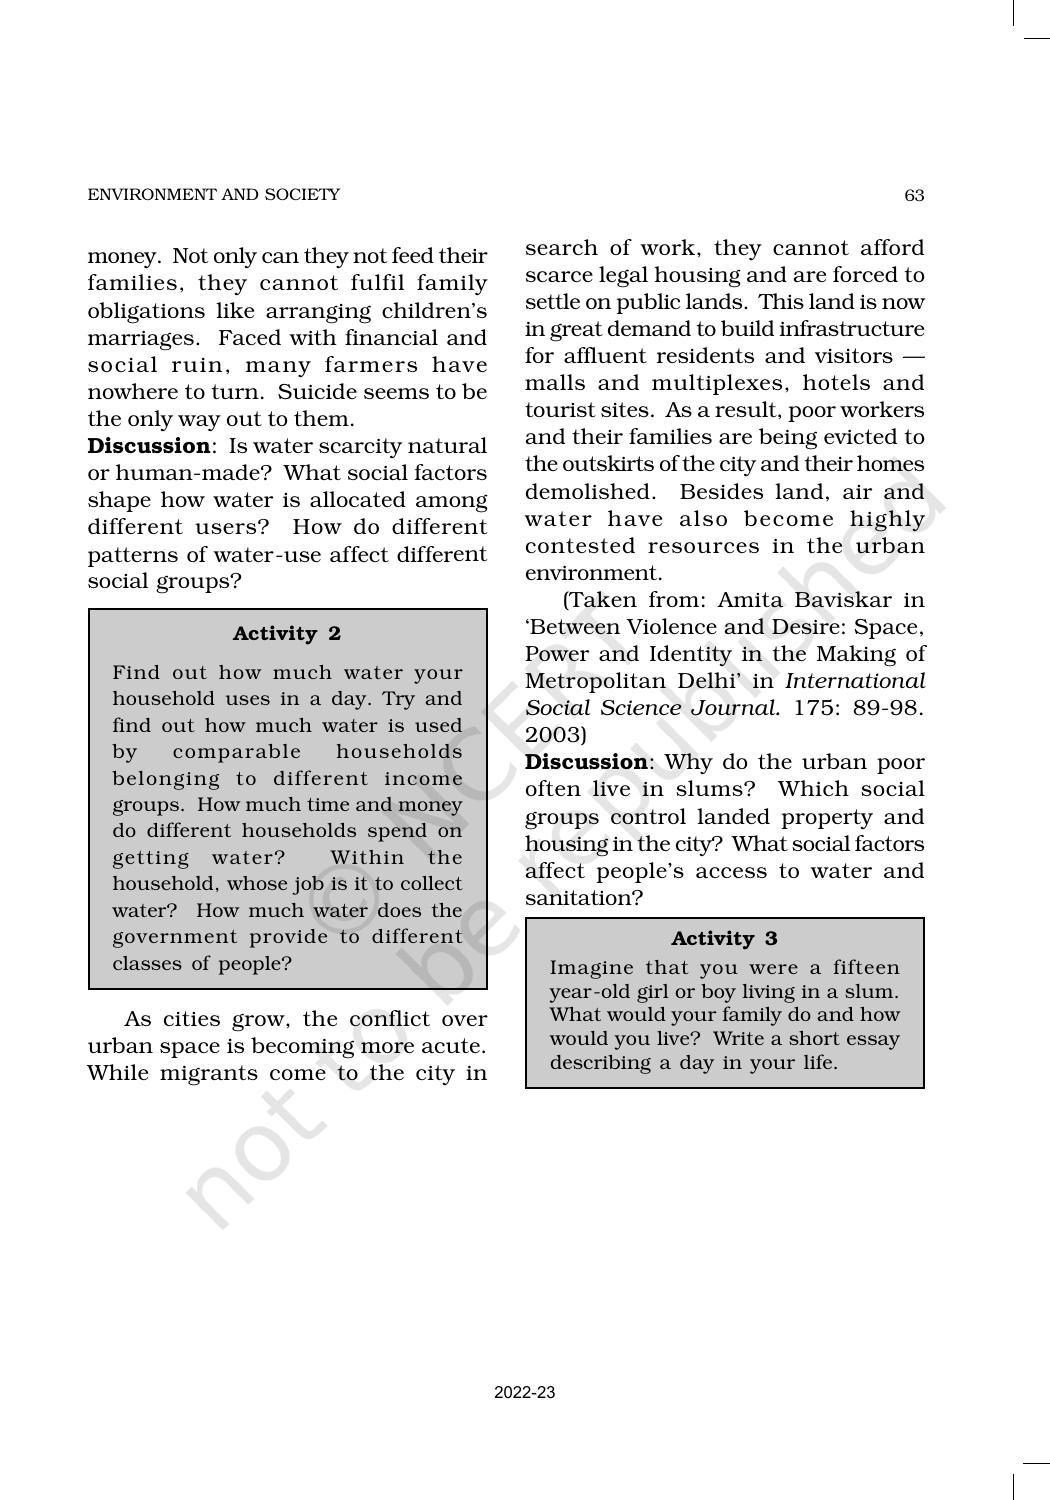 NCERT Book for Class 11 Sociology (Part-II) Chapter 3 Environment and Society - Page 14